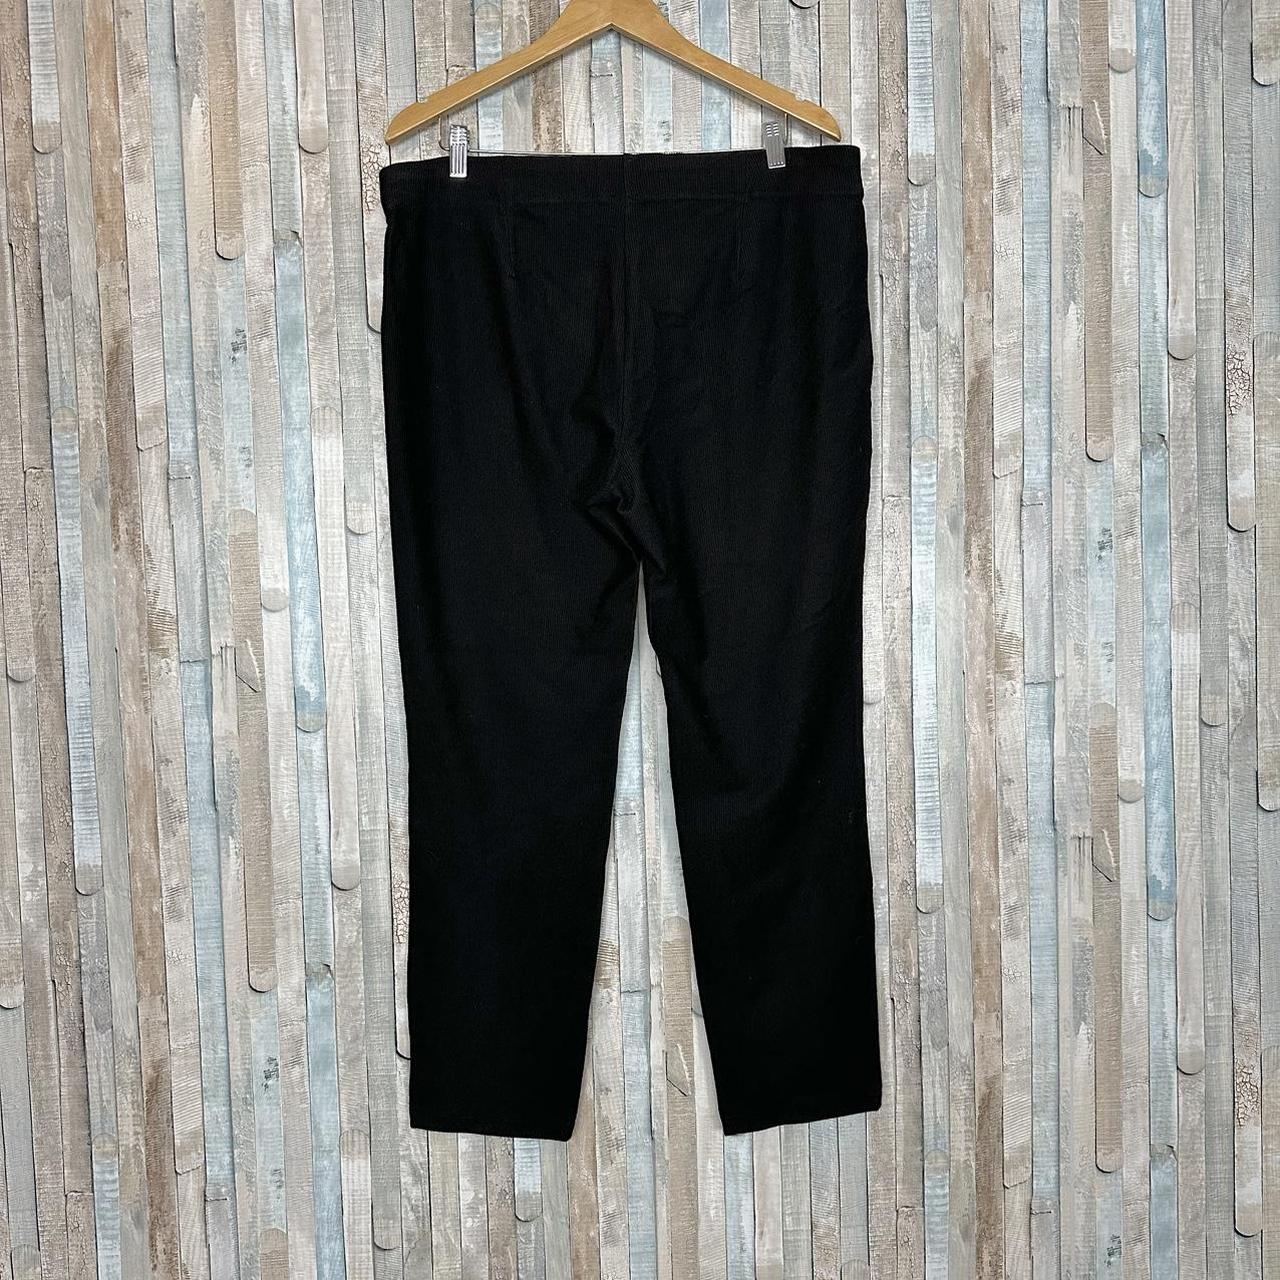 Pull on pants from Eileen Fisher in soft and - Depop